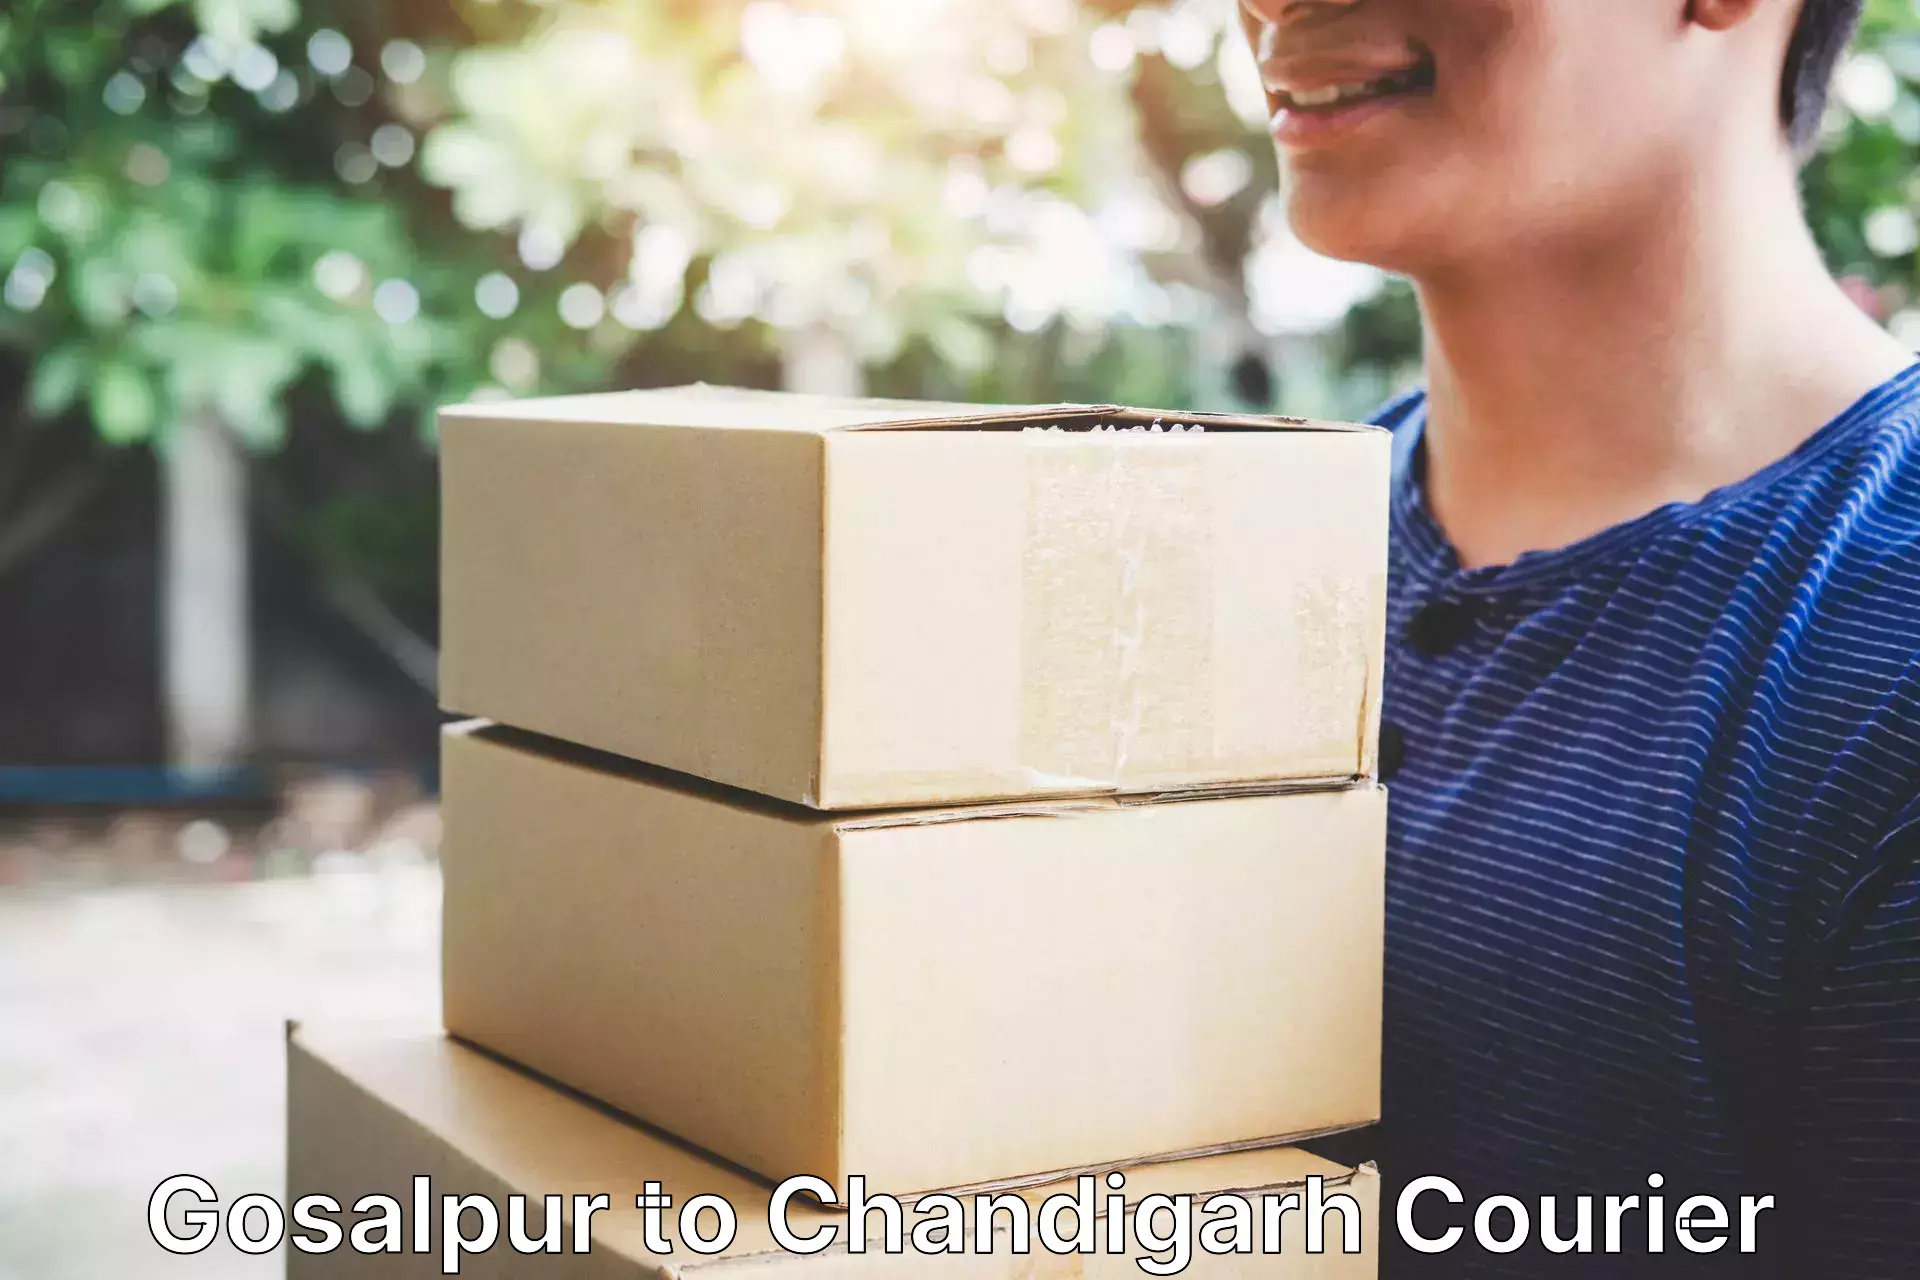 Small business couriers in Gosalpur to Chandigarh